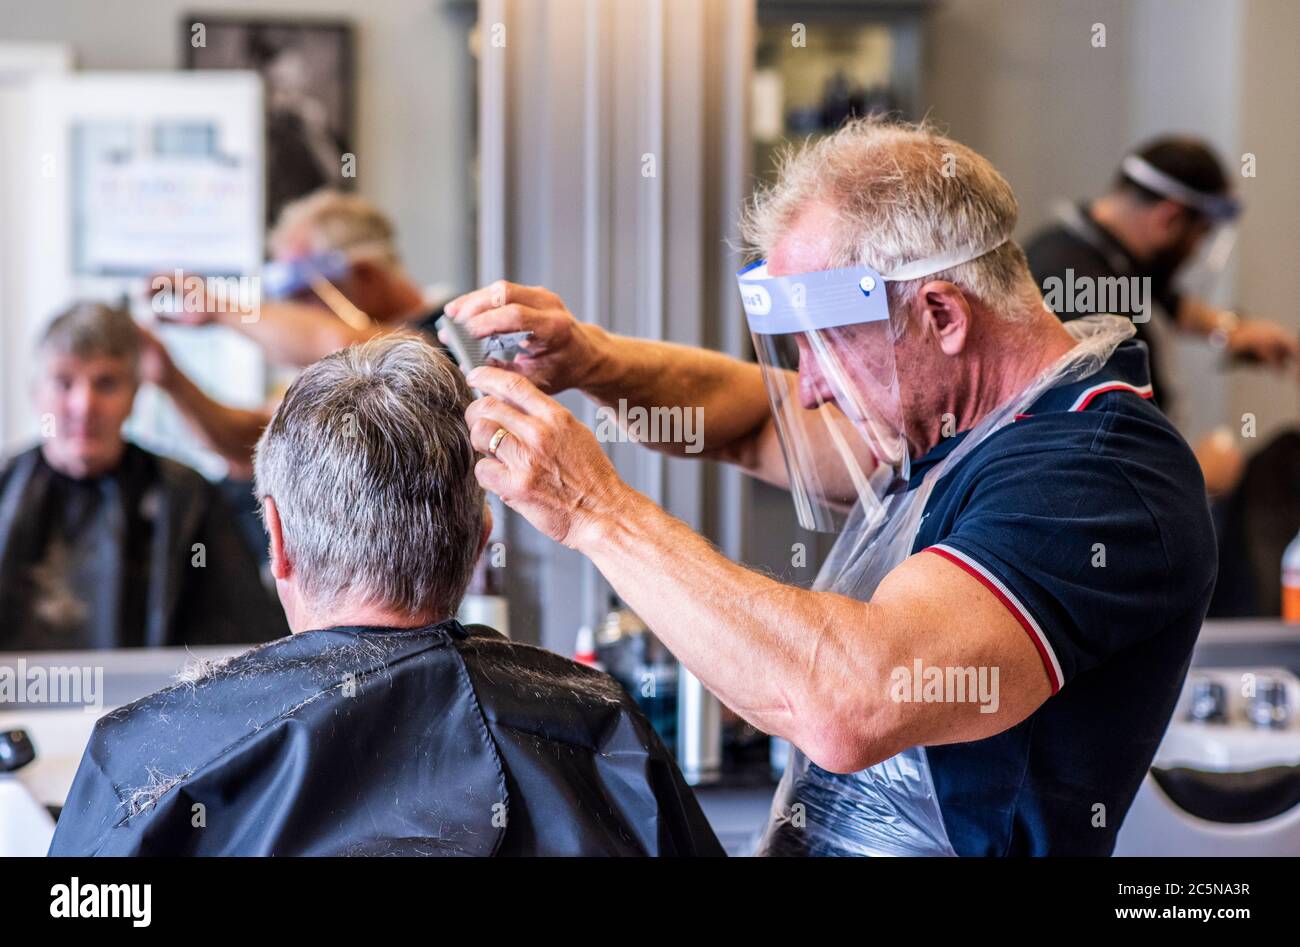 Harrogate, North Yorkshire, UK. 4th July, 2020. David Steca, owner of Steca N.6 barber shop, at work wearing full PPE as barbers reopen to the public on Super Saturday. Credit: ernesto rogata/Alamy Live News Stock Photo